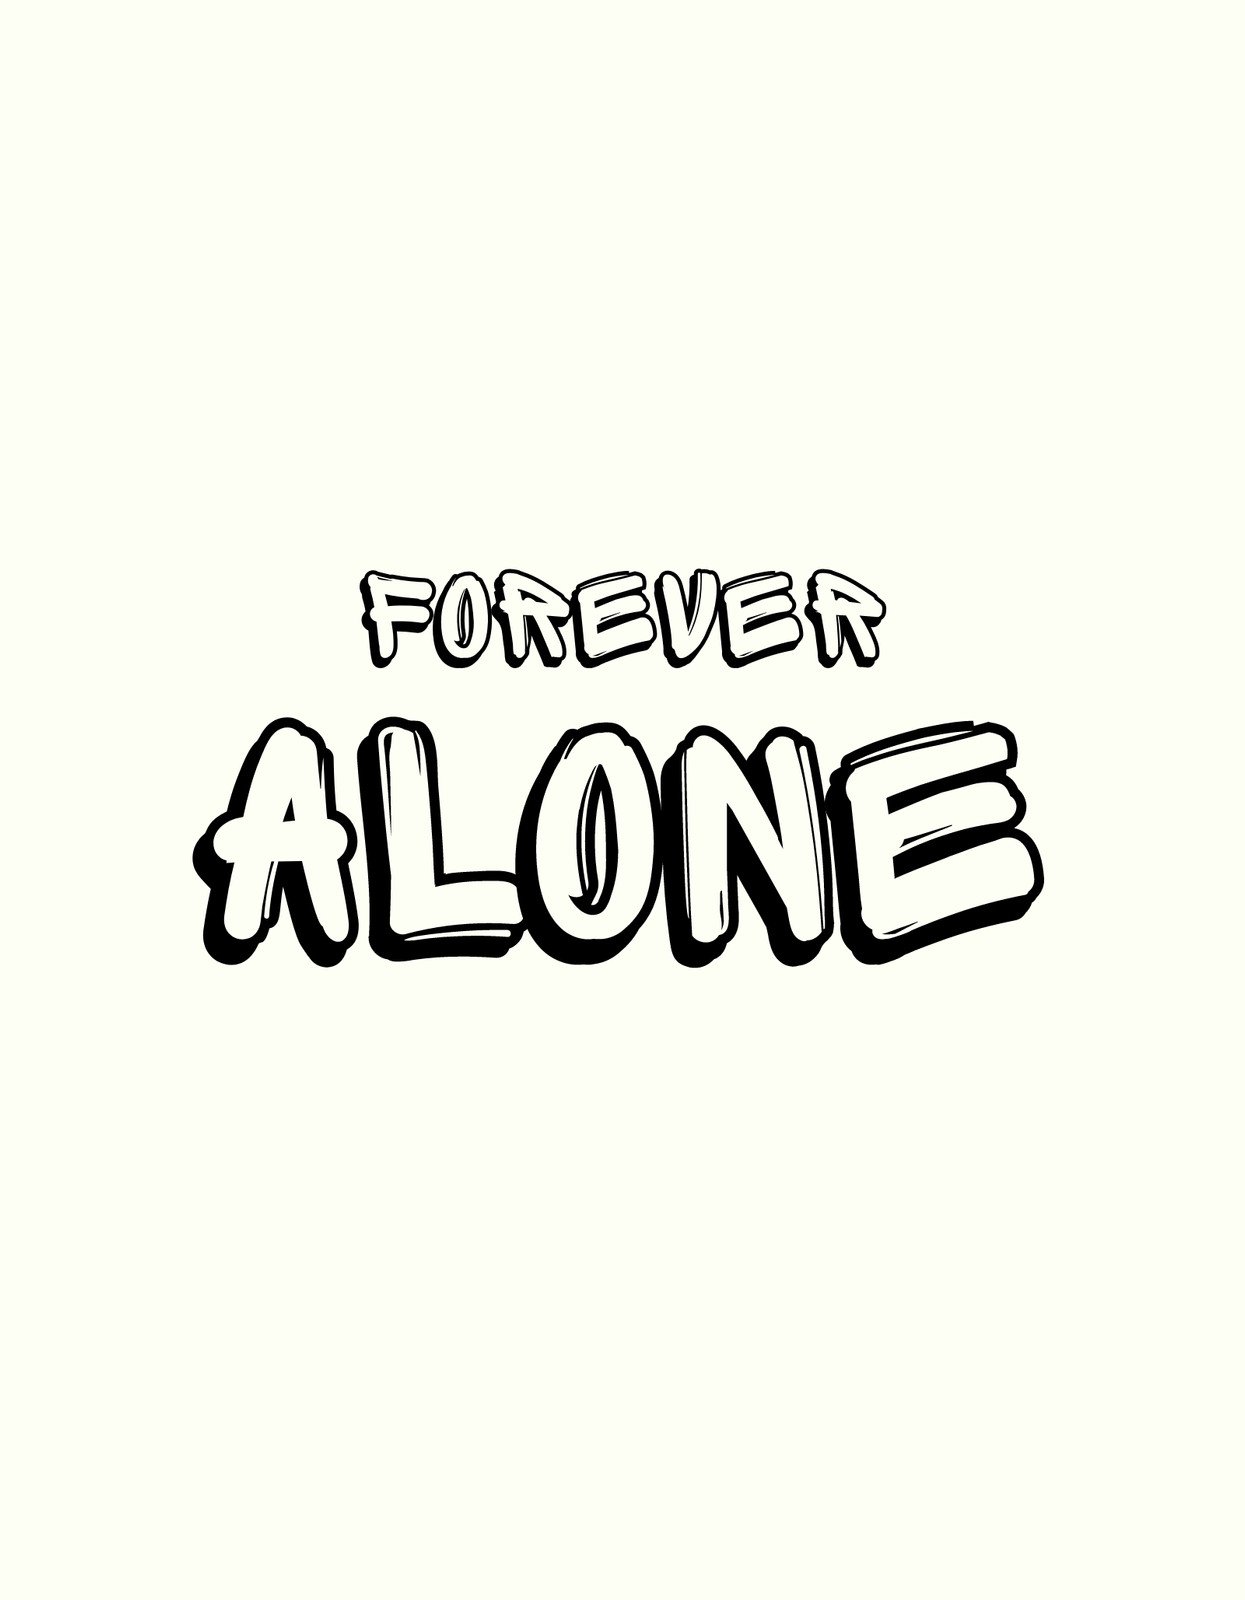 real forever alone